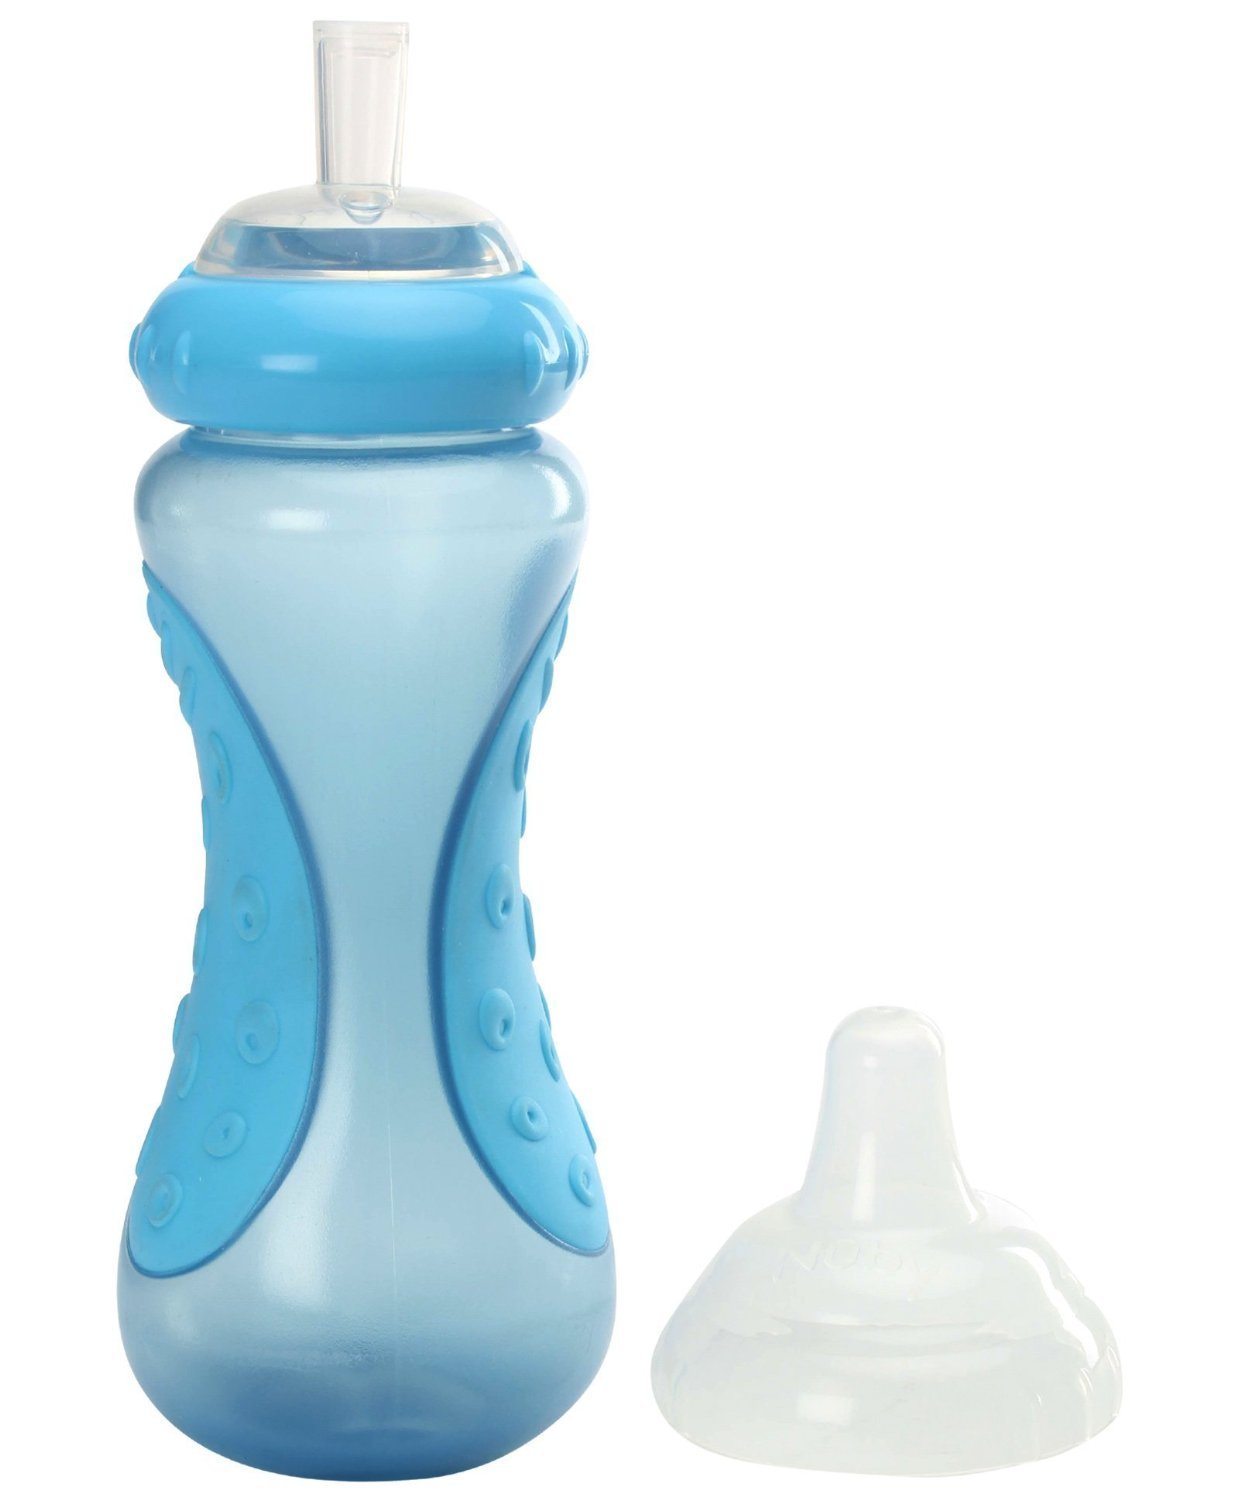 Nuby No Spill Sports Sipper Cup